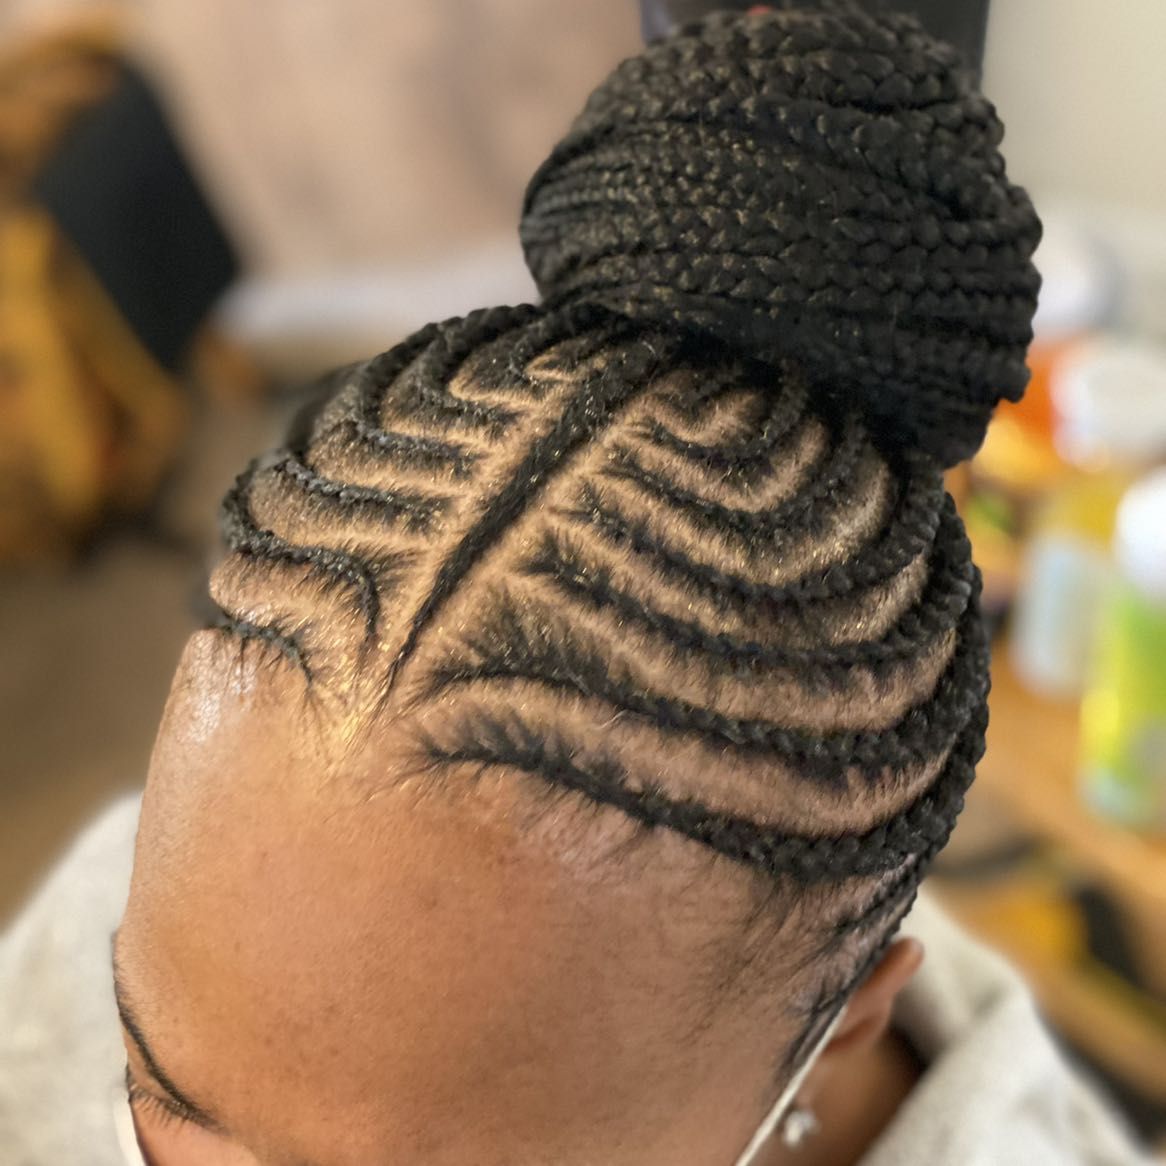 Braided Style W/ Hair Added (Ends Only) portfolio